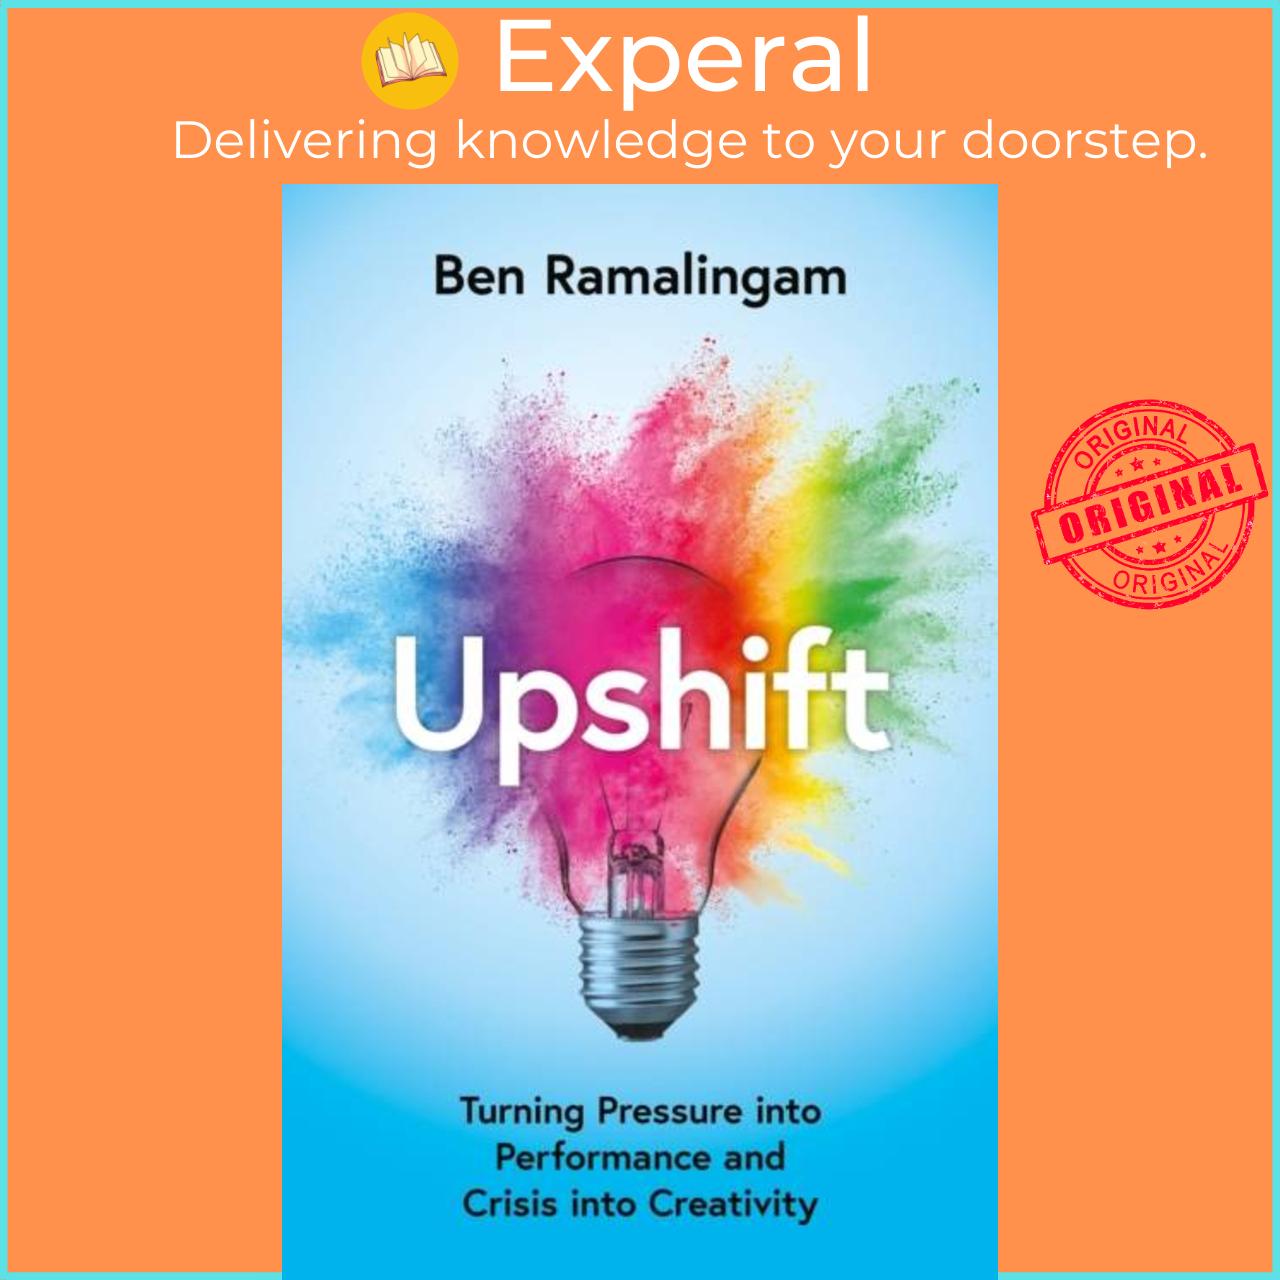 Sách - Upshift - Turning Pressure into Performance and Cr into Creativity by Ben Ramalingam (UK edition, hardcover)